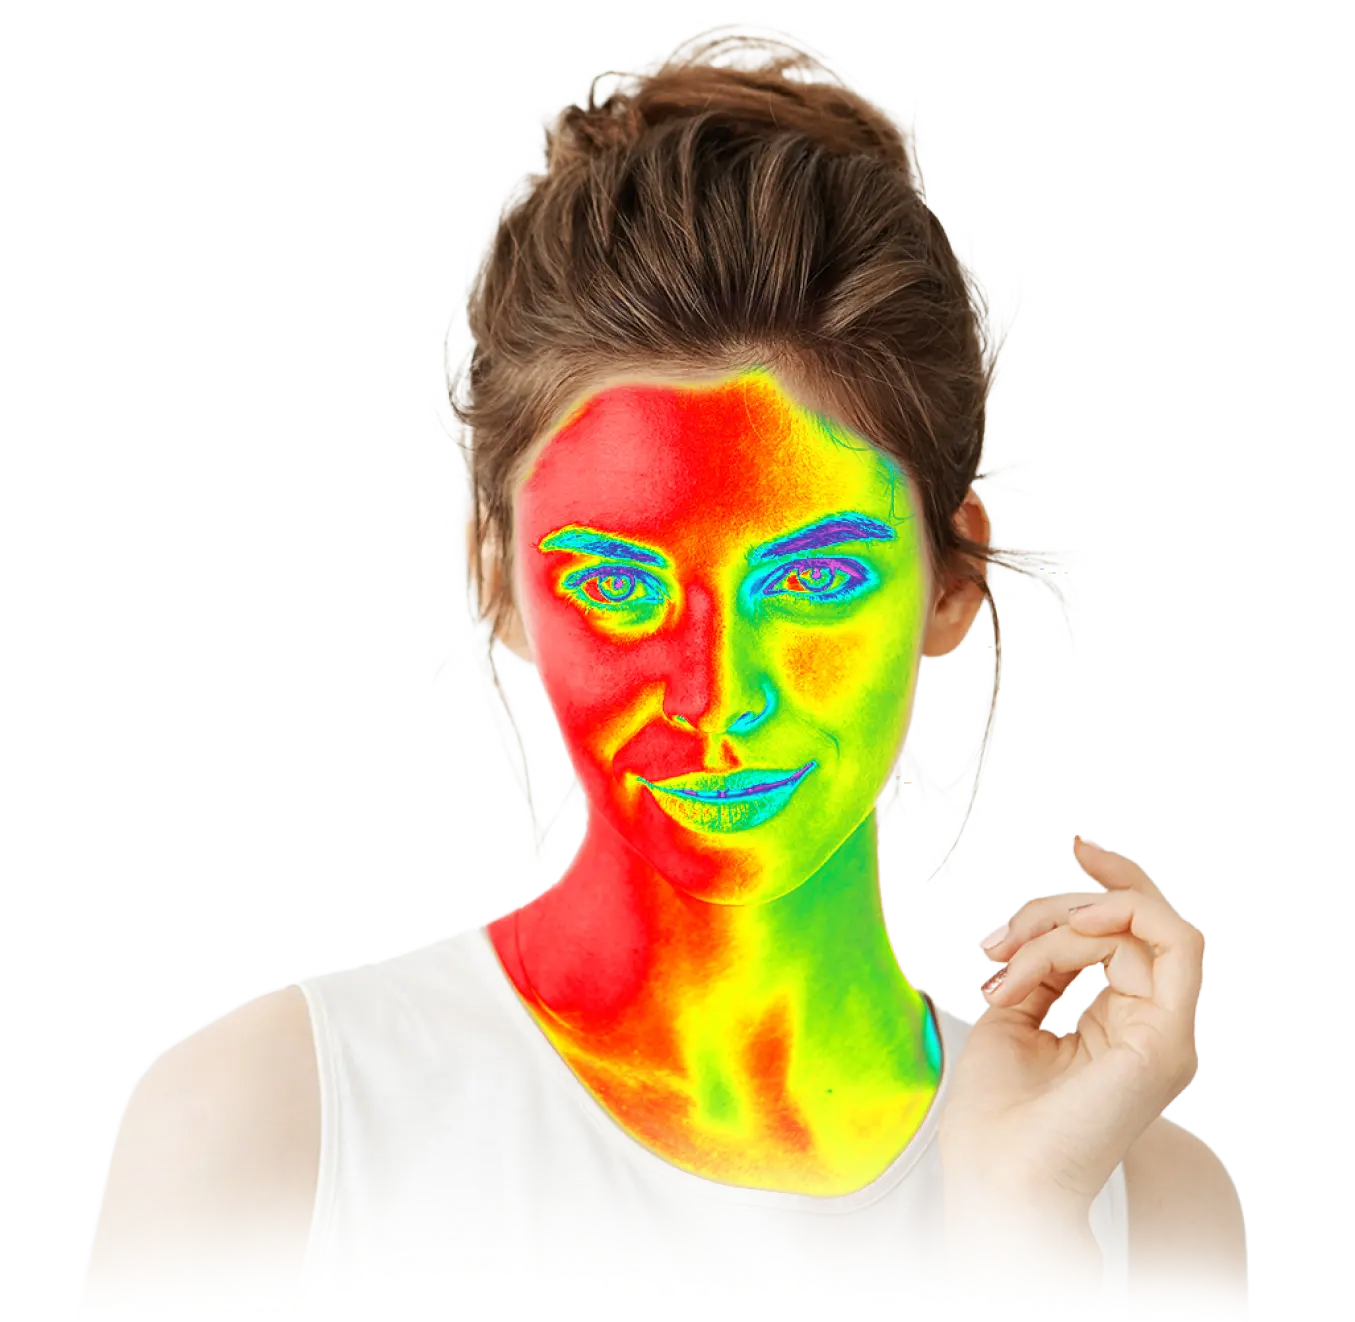 A thermal image of a woman